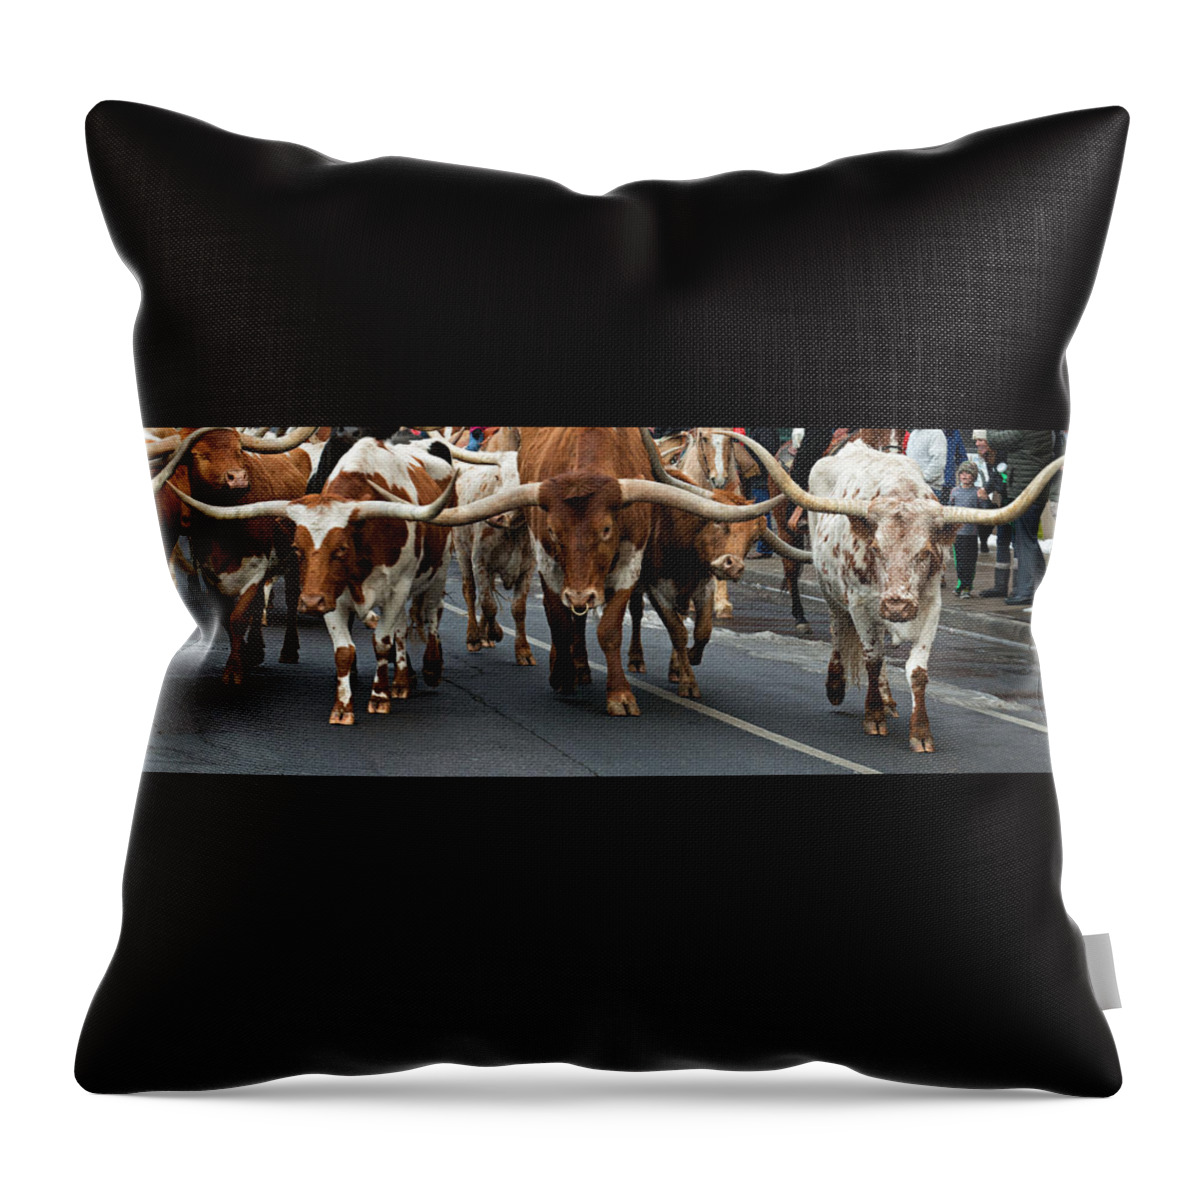 Denver Throw Pillow featuring the photograph Western Stock Show - 2 by OLena Art by Lena Owens - Vibrant DESIGN